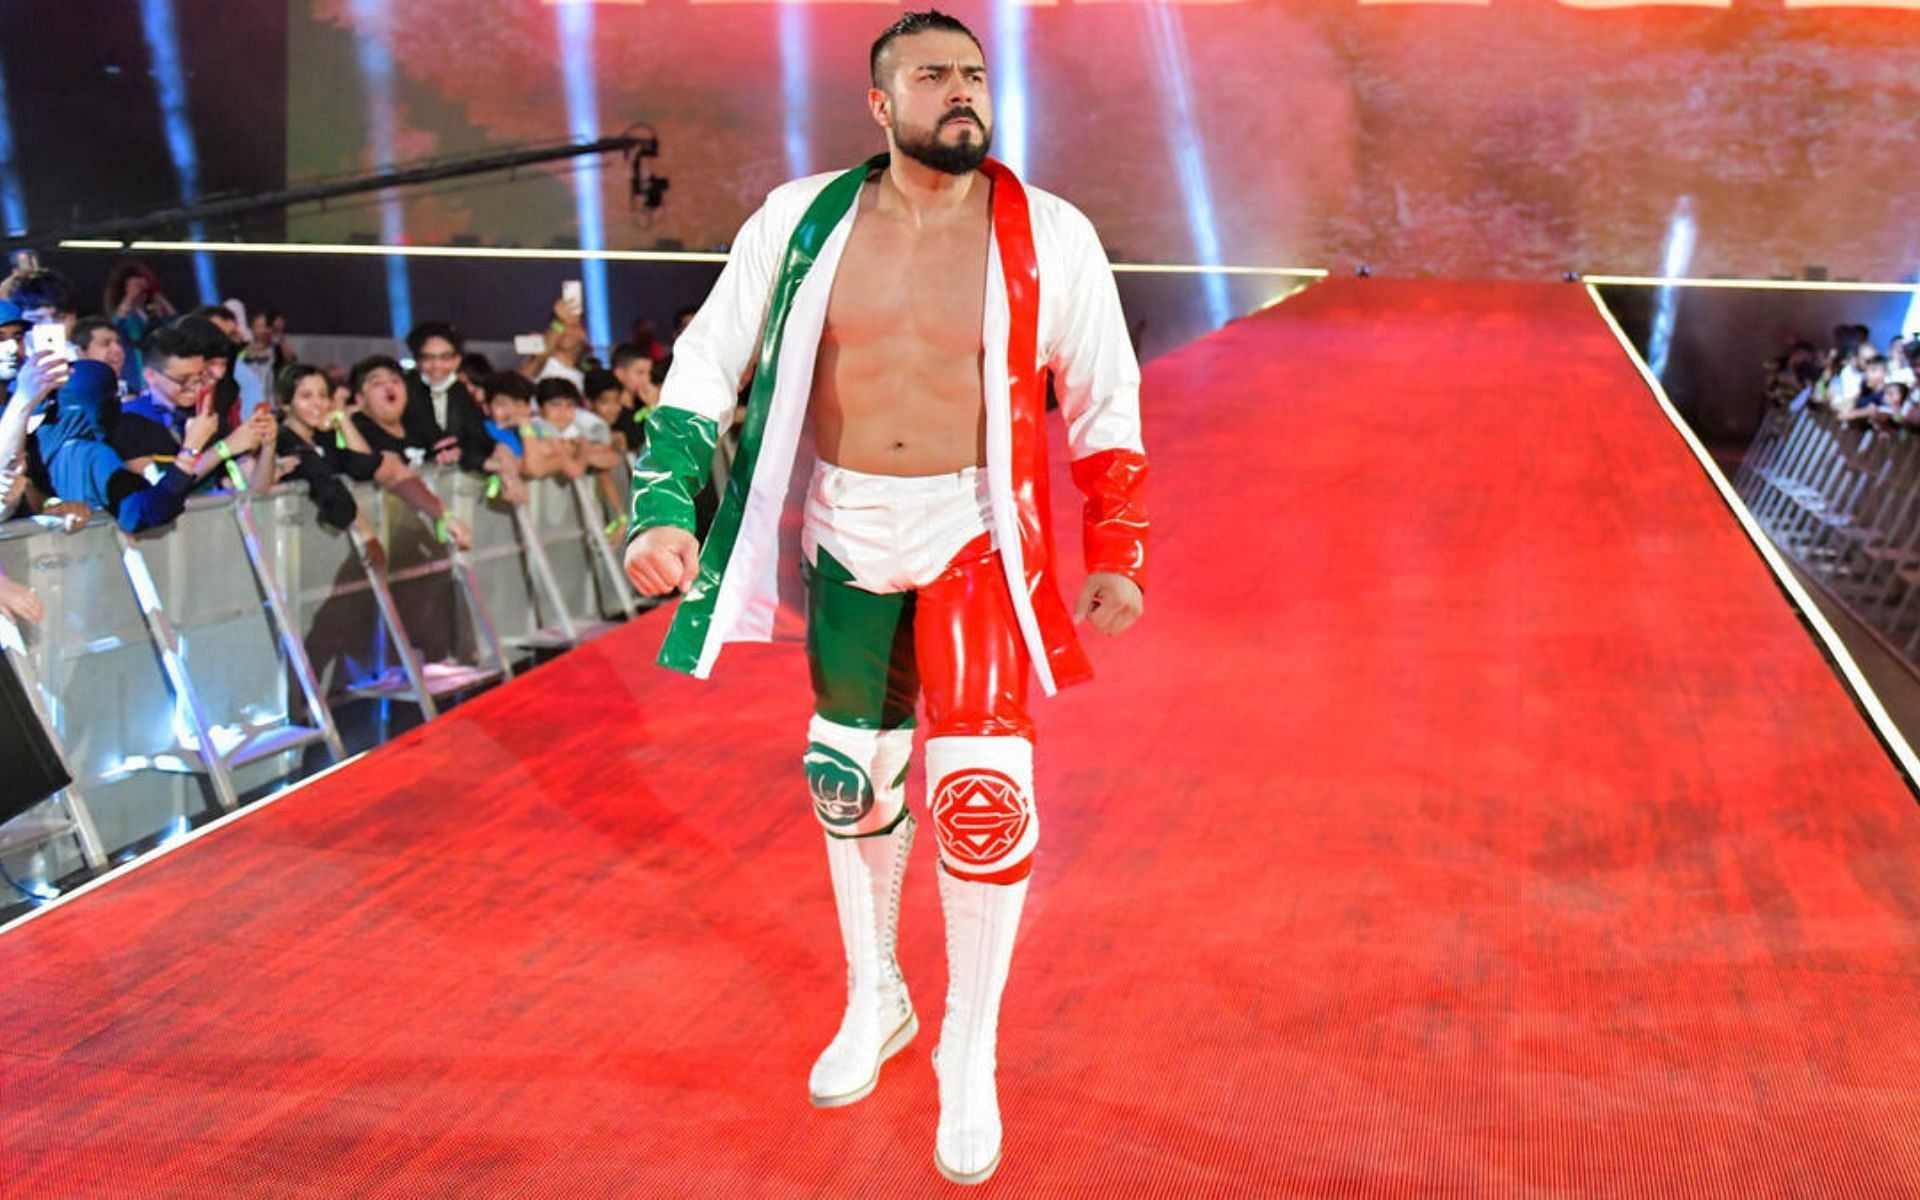 WWE recently welcomed Andrade back at The Royal Rumble